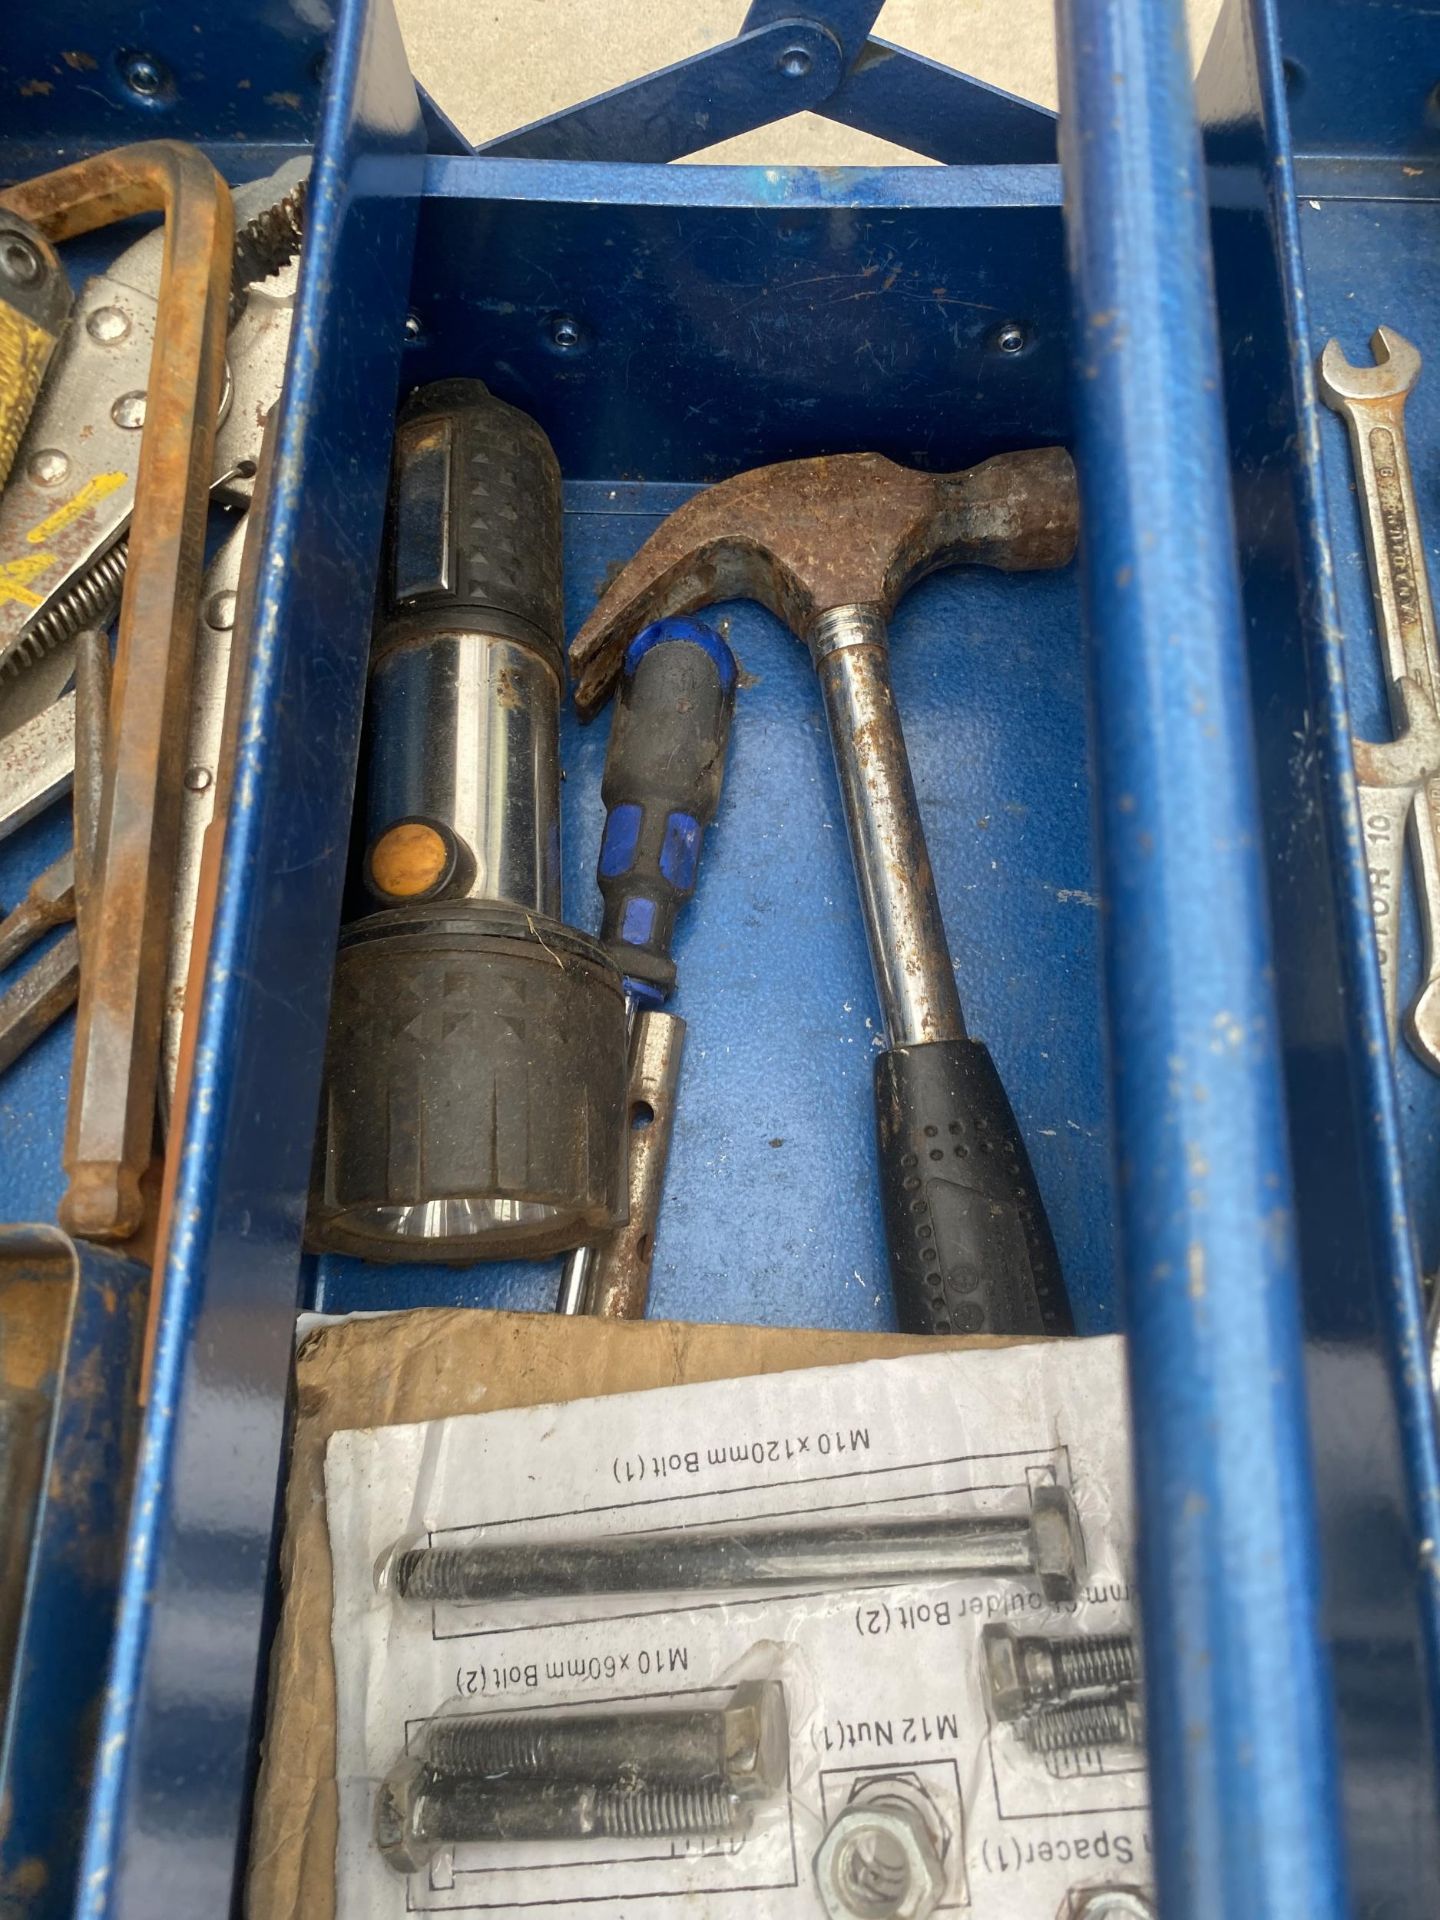 A METAL TOOL BOX CONTAINING AN ASSORTMENT OF TOOLS - Image 4 of 4